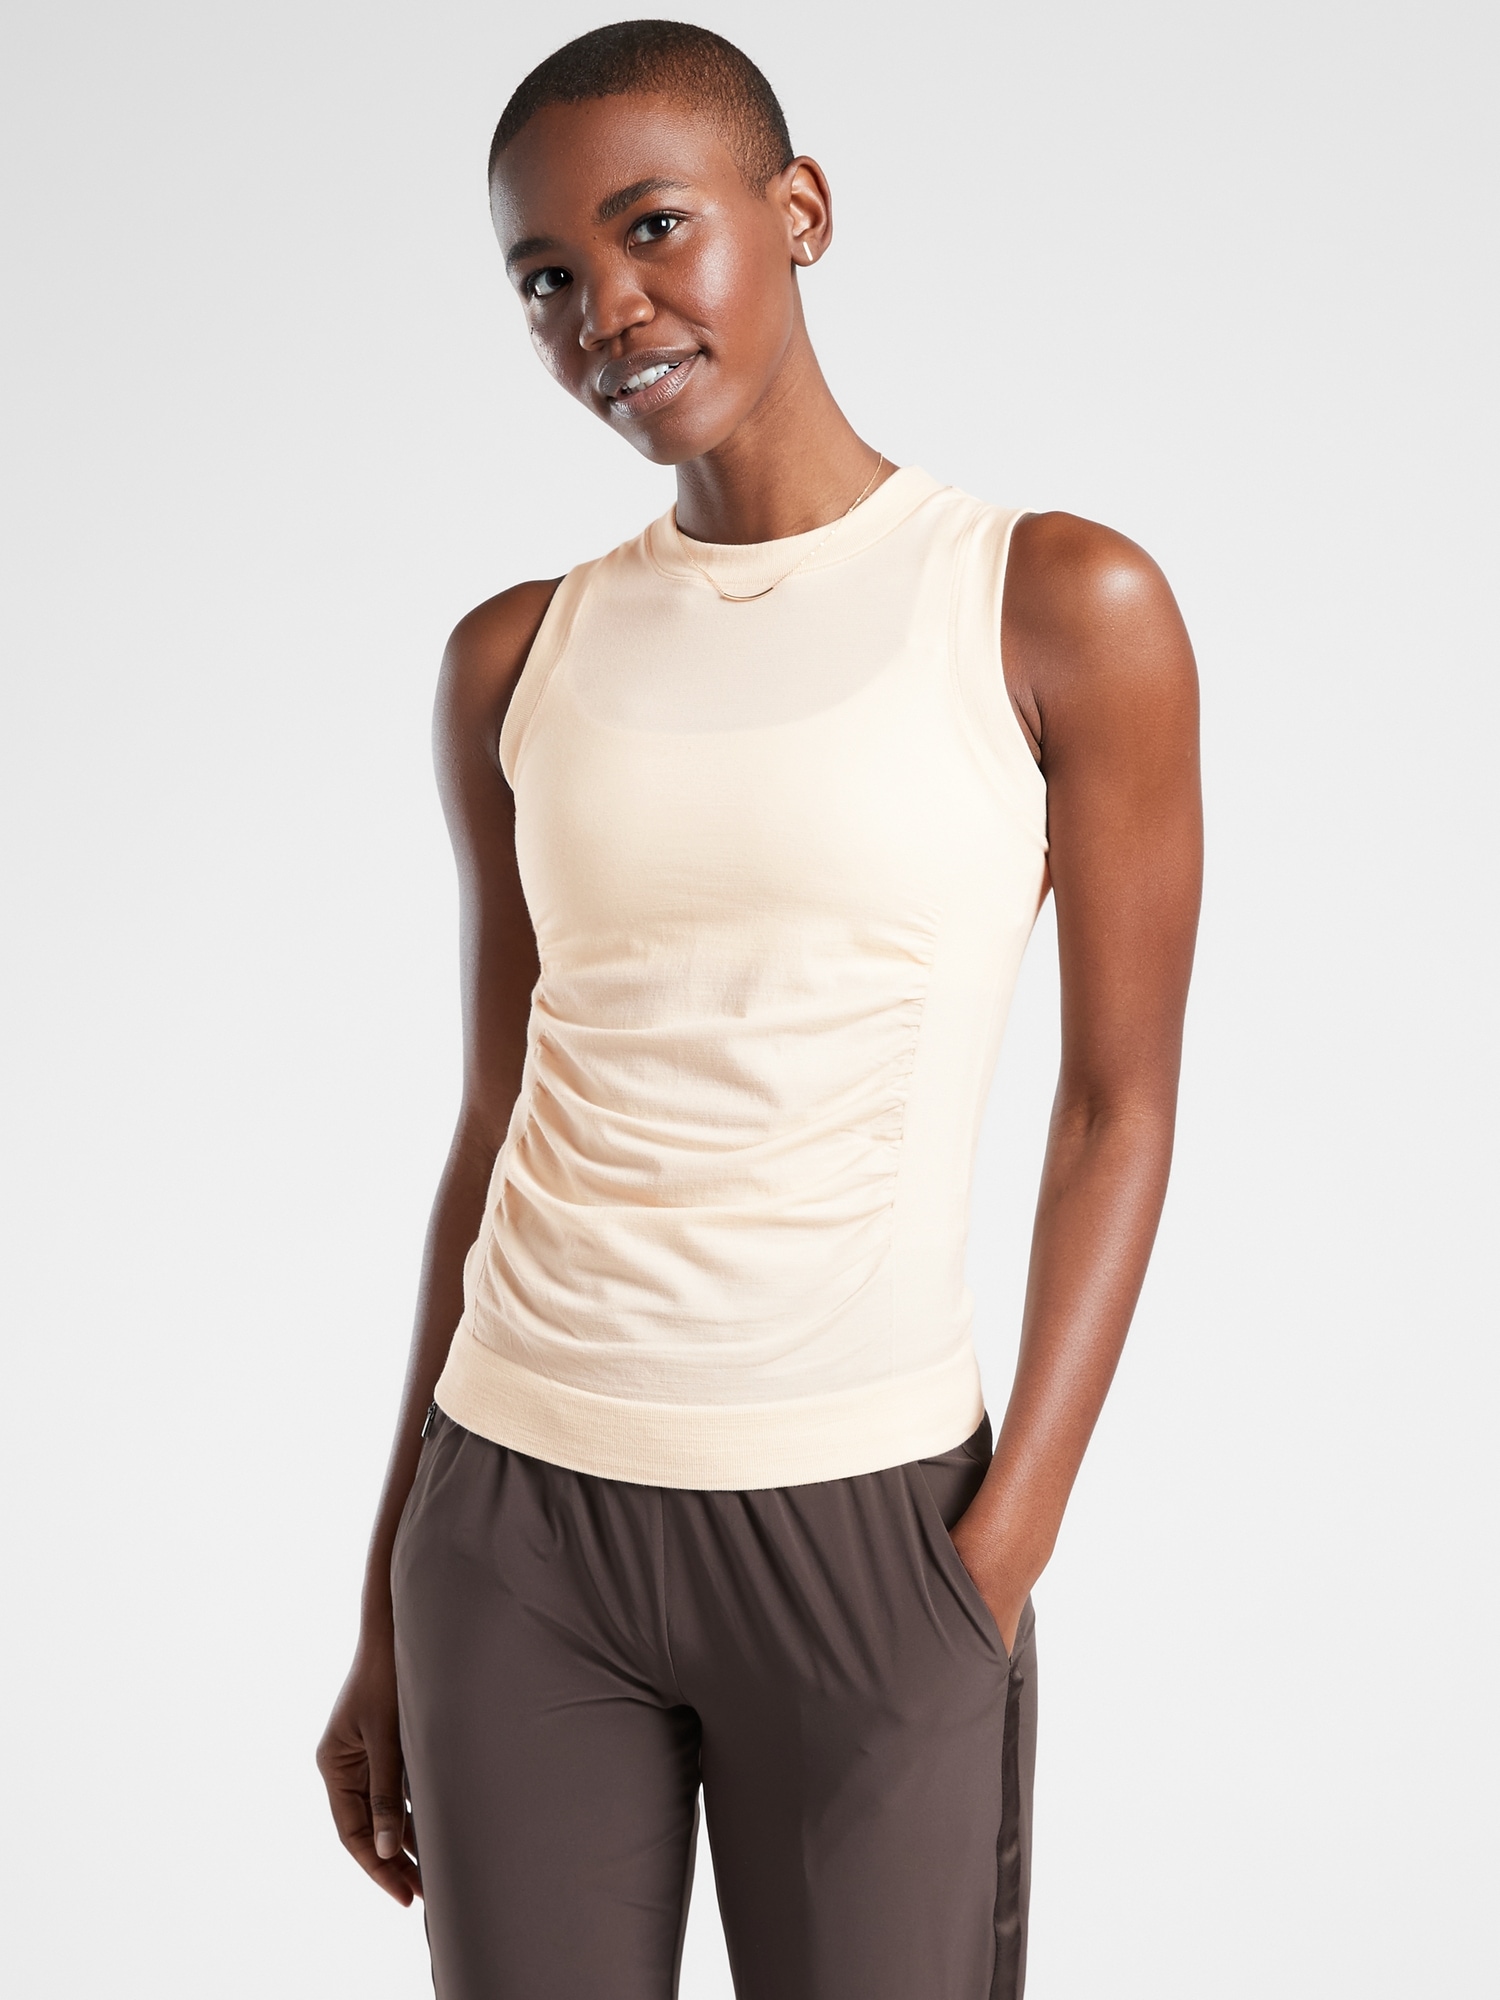 Foresthill Ascent Seamless Tank | Athleta